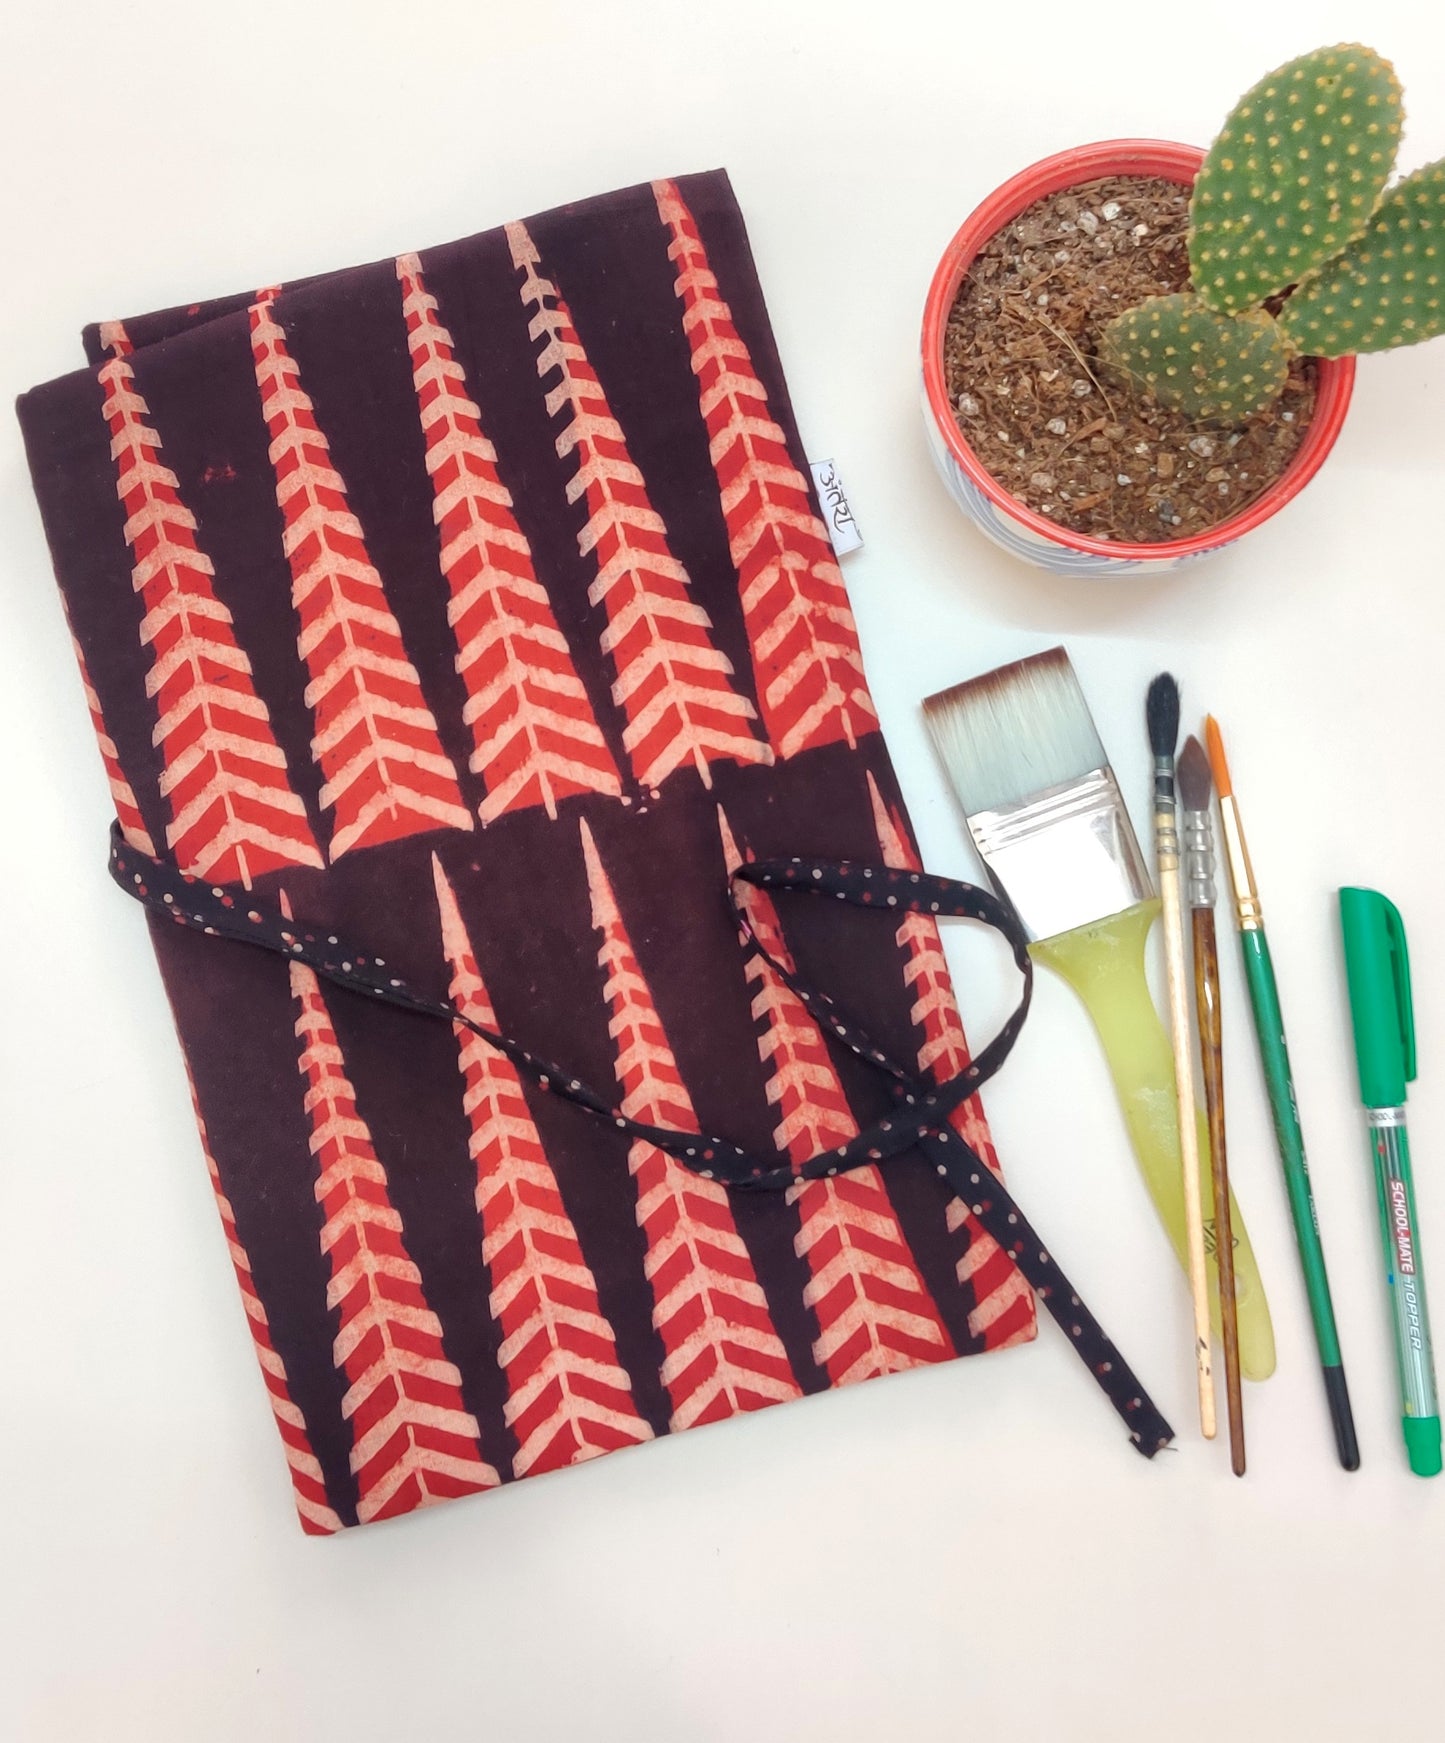 Brush roll up case | Turn into a A5 Notebook folder | Tie around waist when painting